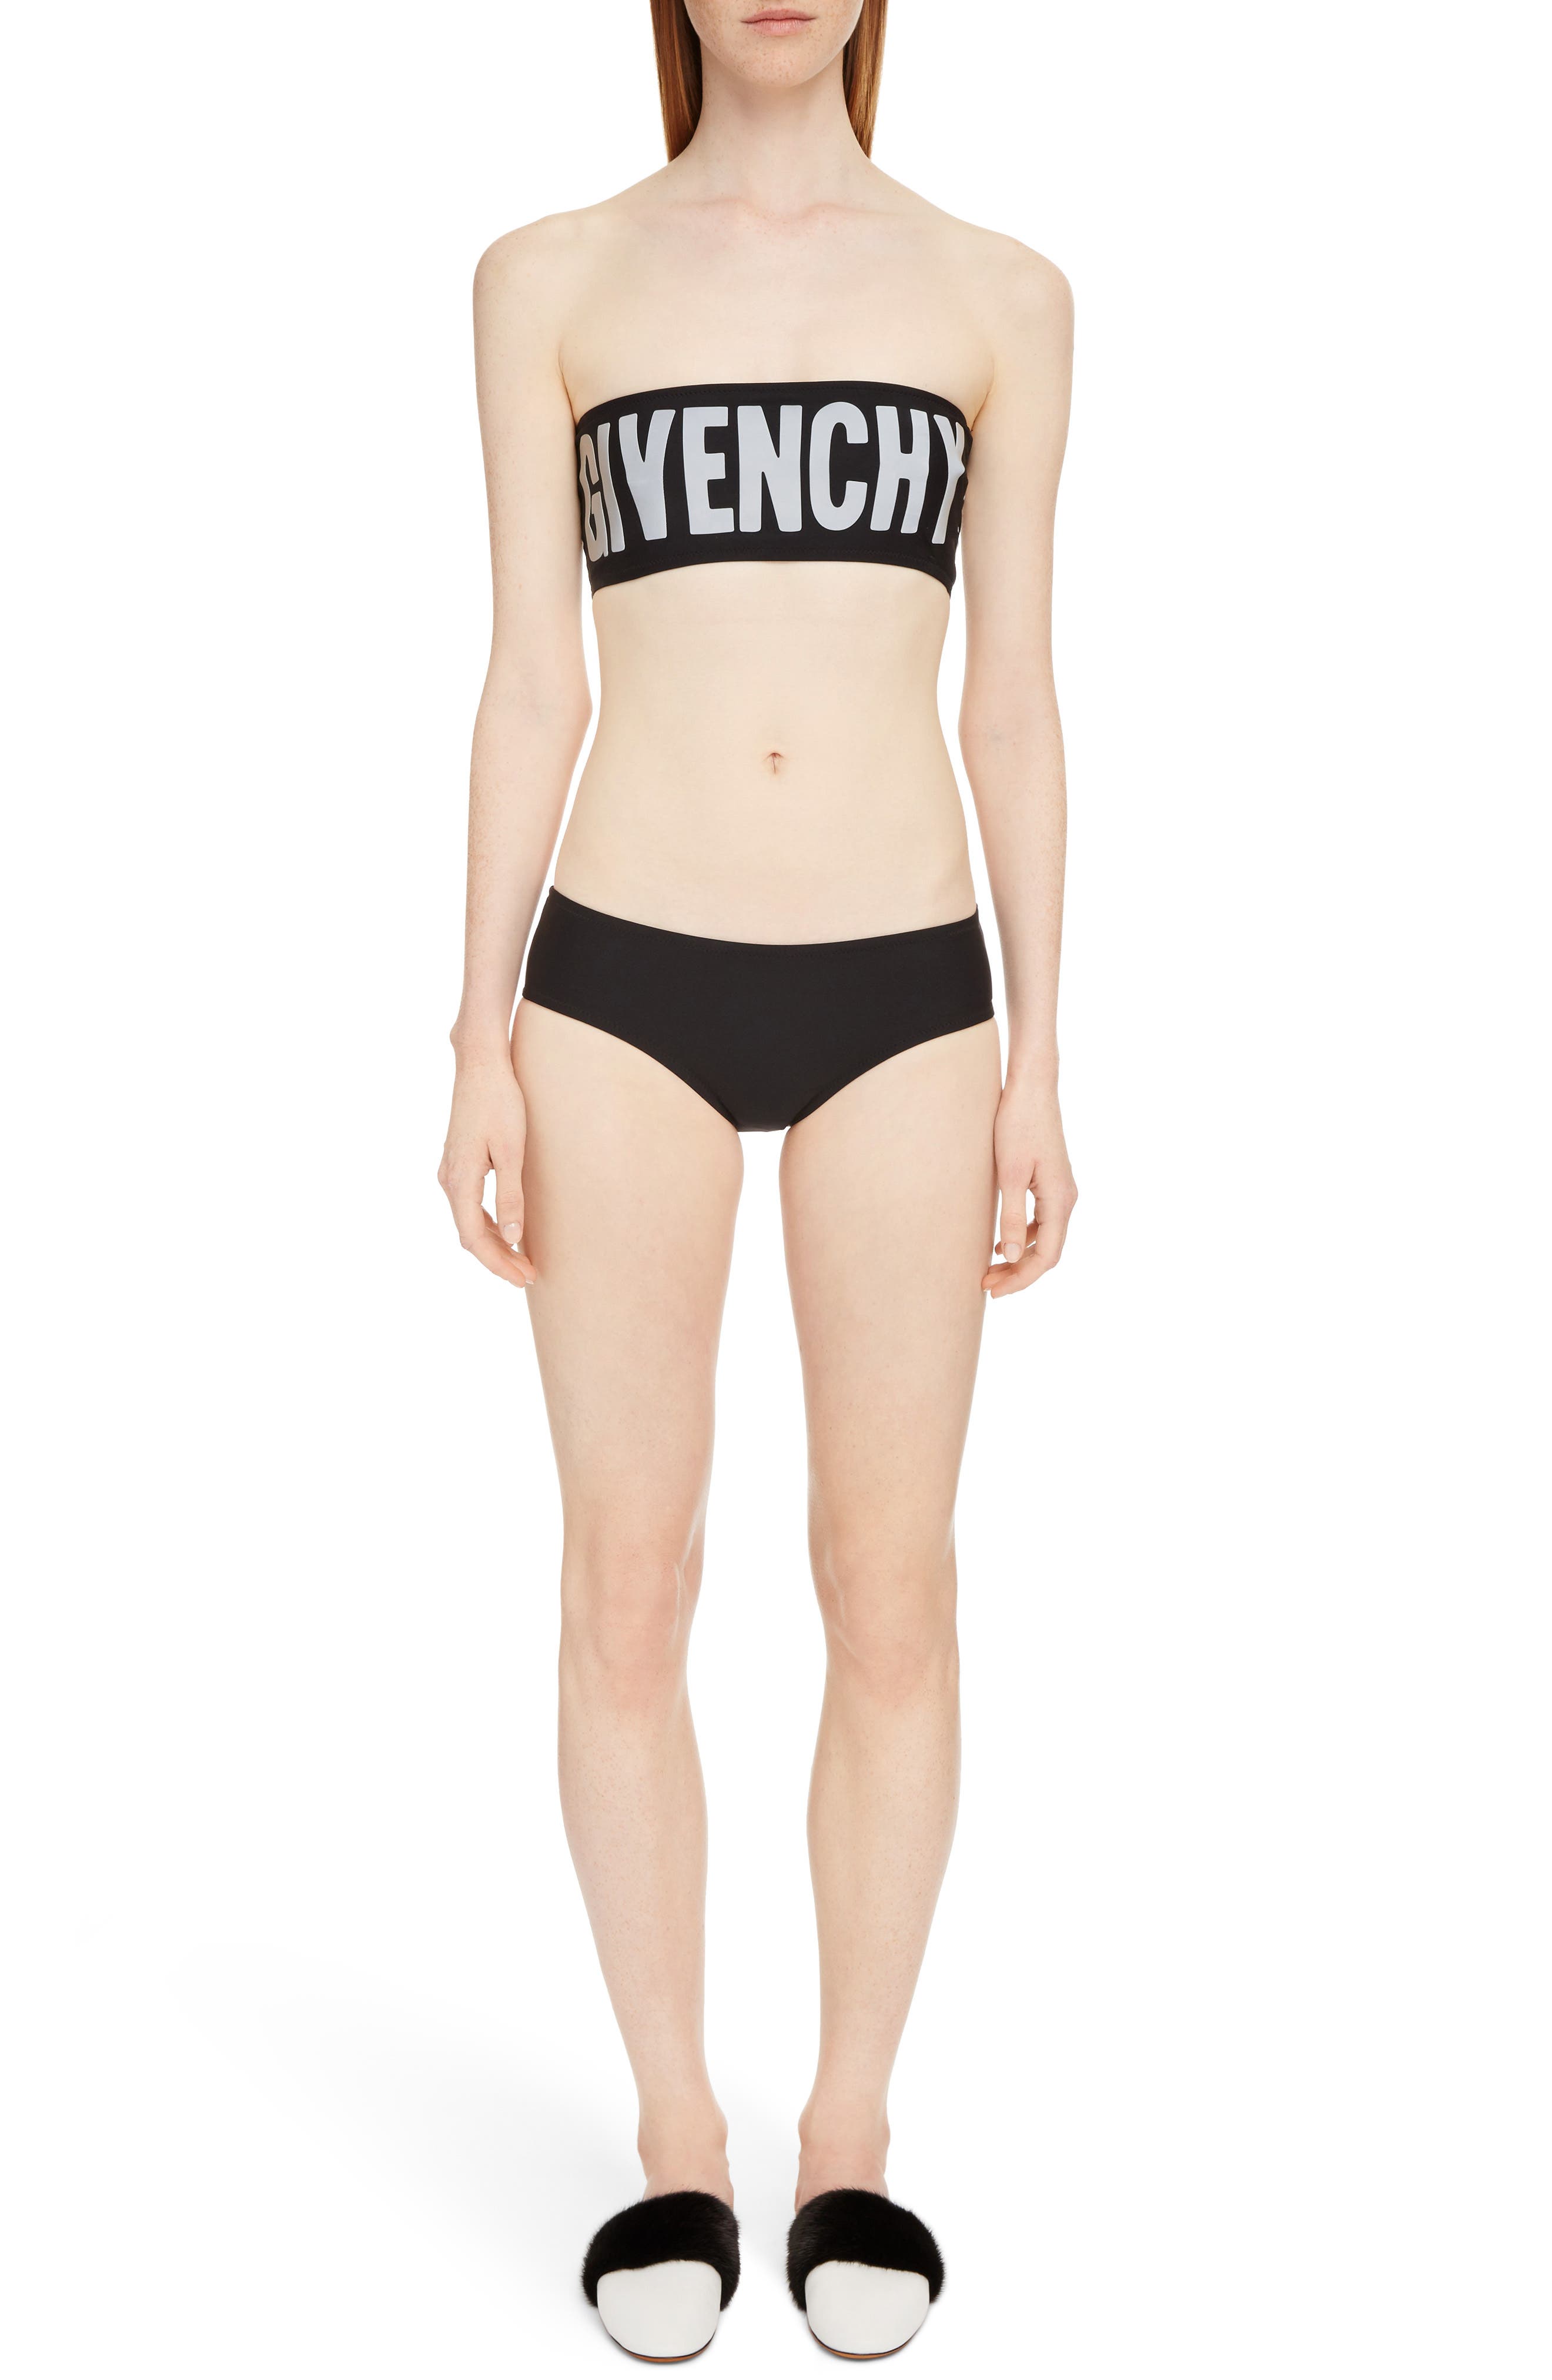 givenchy bathing suit